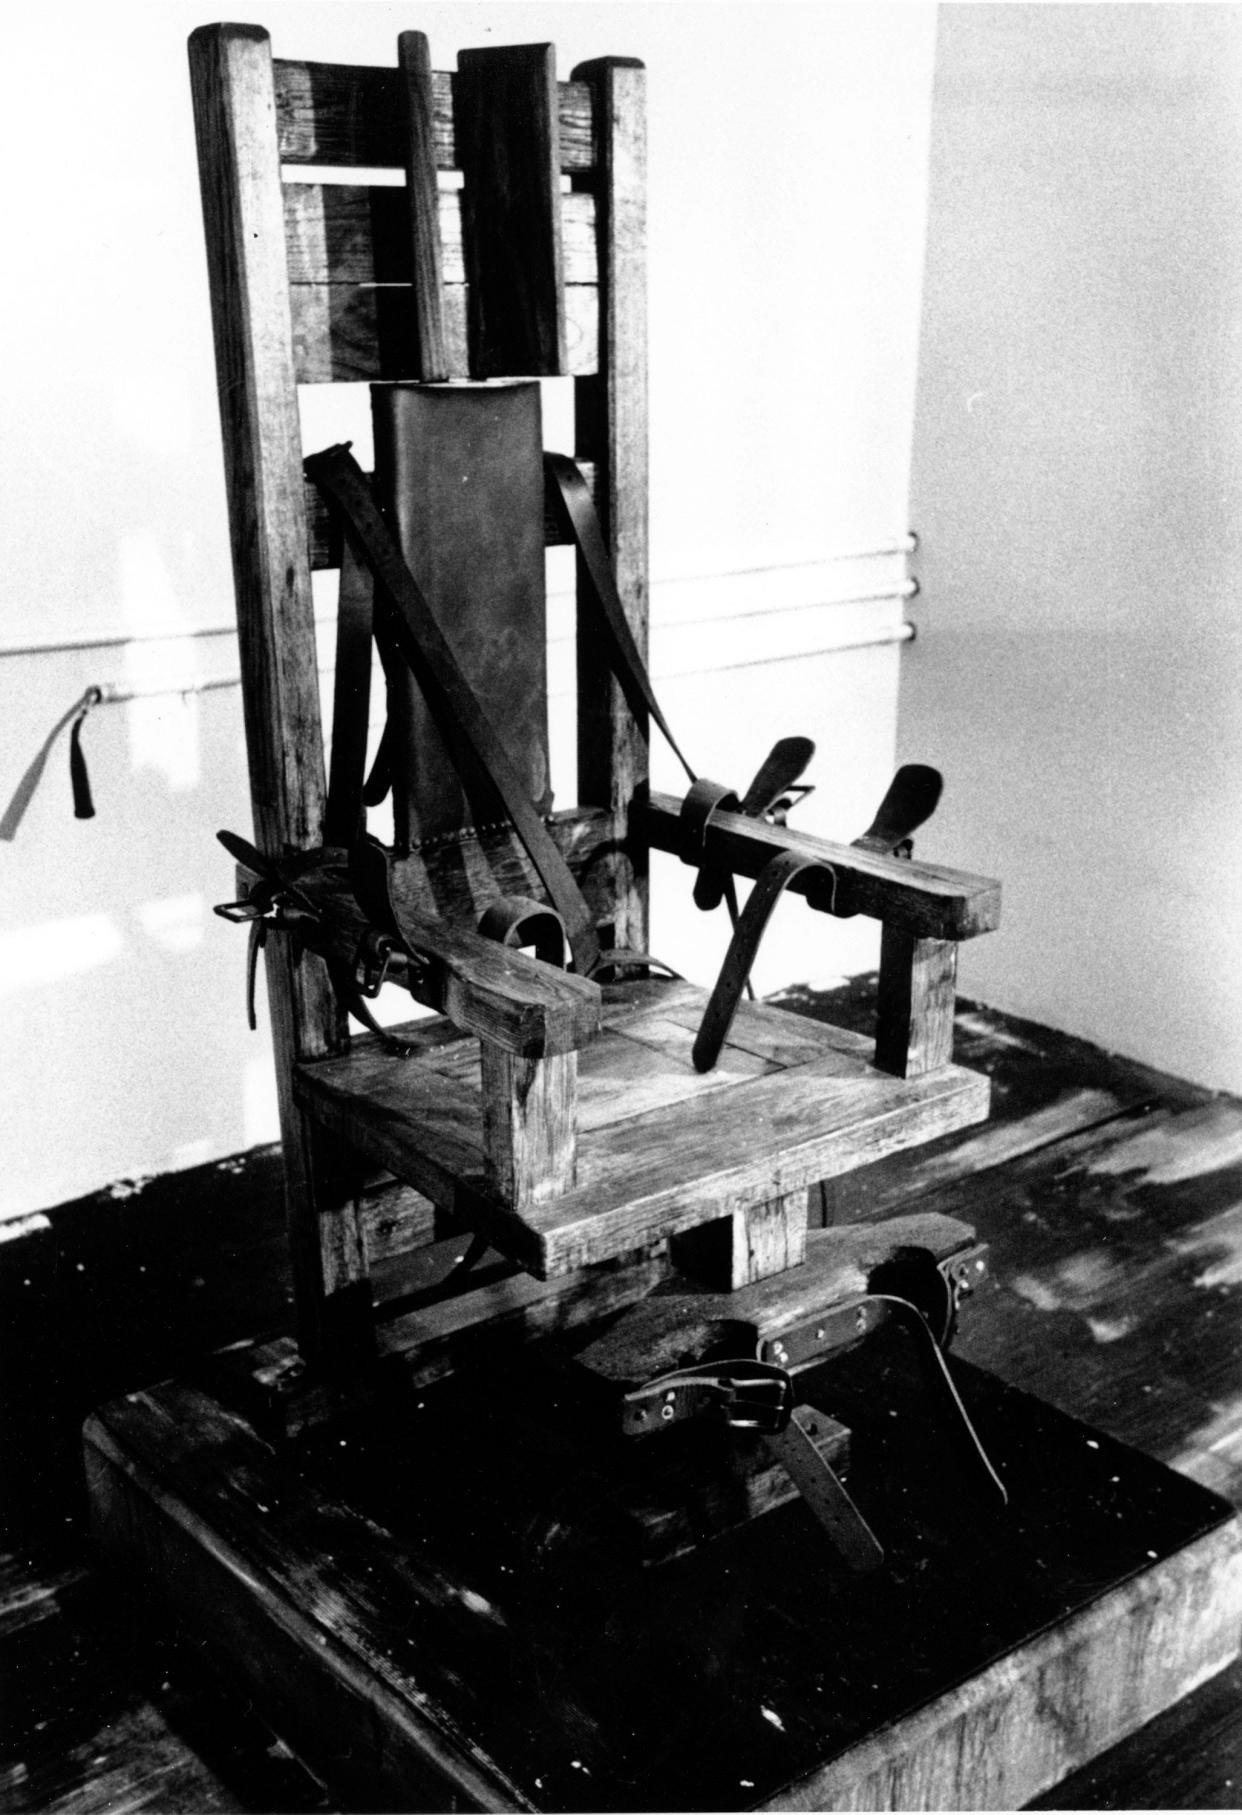 This is an undated file photo of the electric chair at the Tennessee State prison in Nashville. First used by New York State in 1890, it was used throughout the 20th century to execute hundreds.